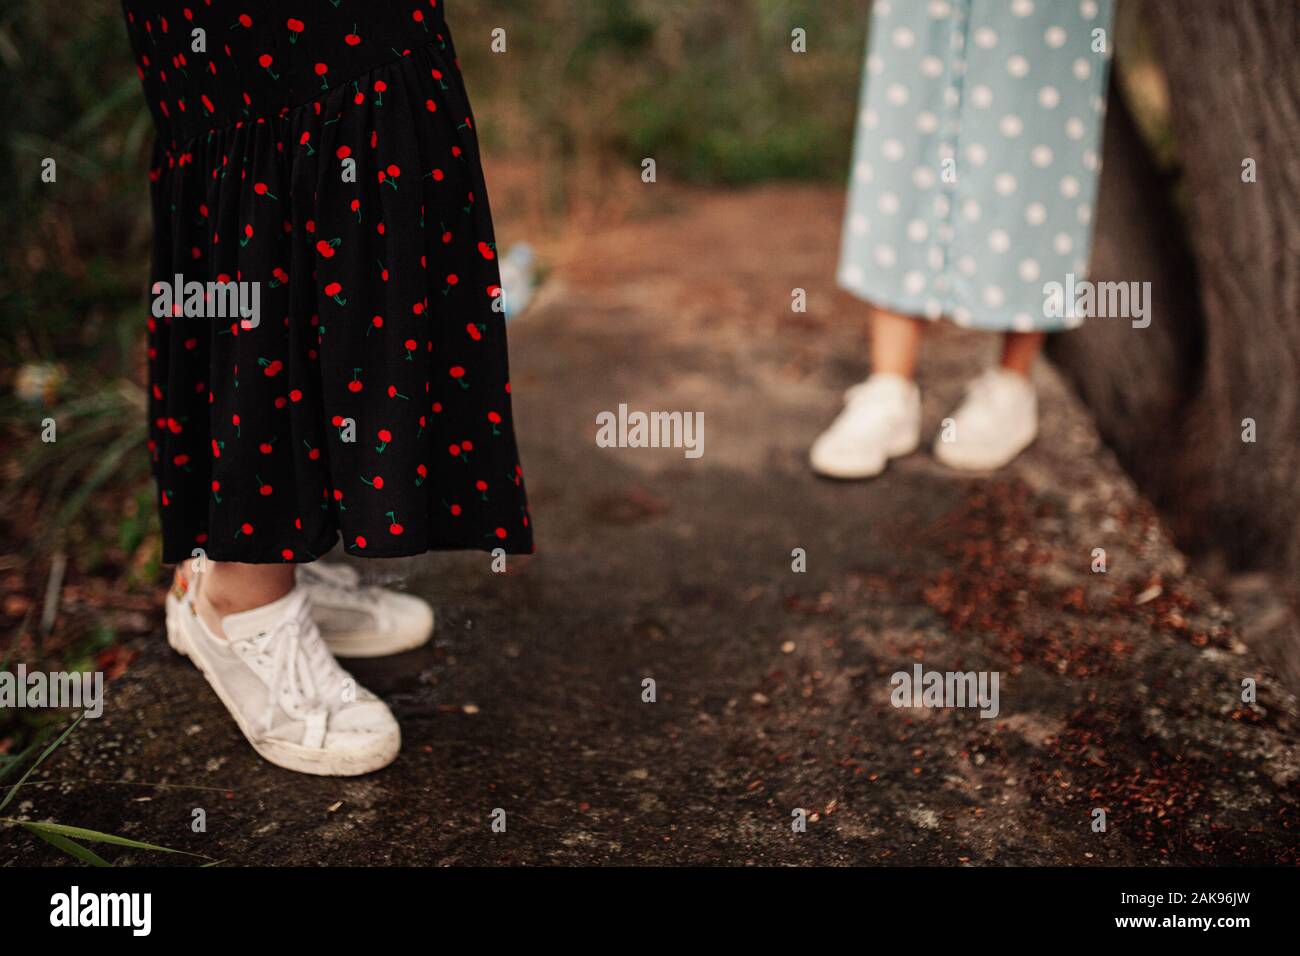 Lower view of two young women walking through the field the field wearing dresses and sneakers Stock Photo